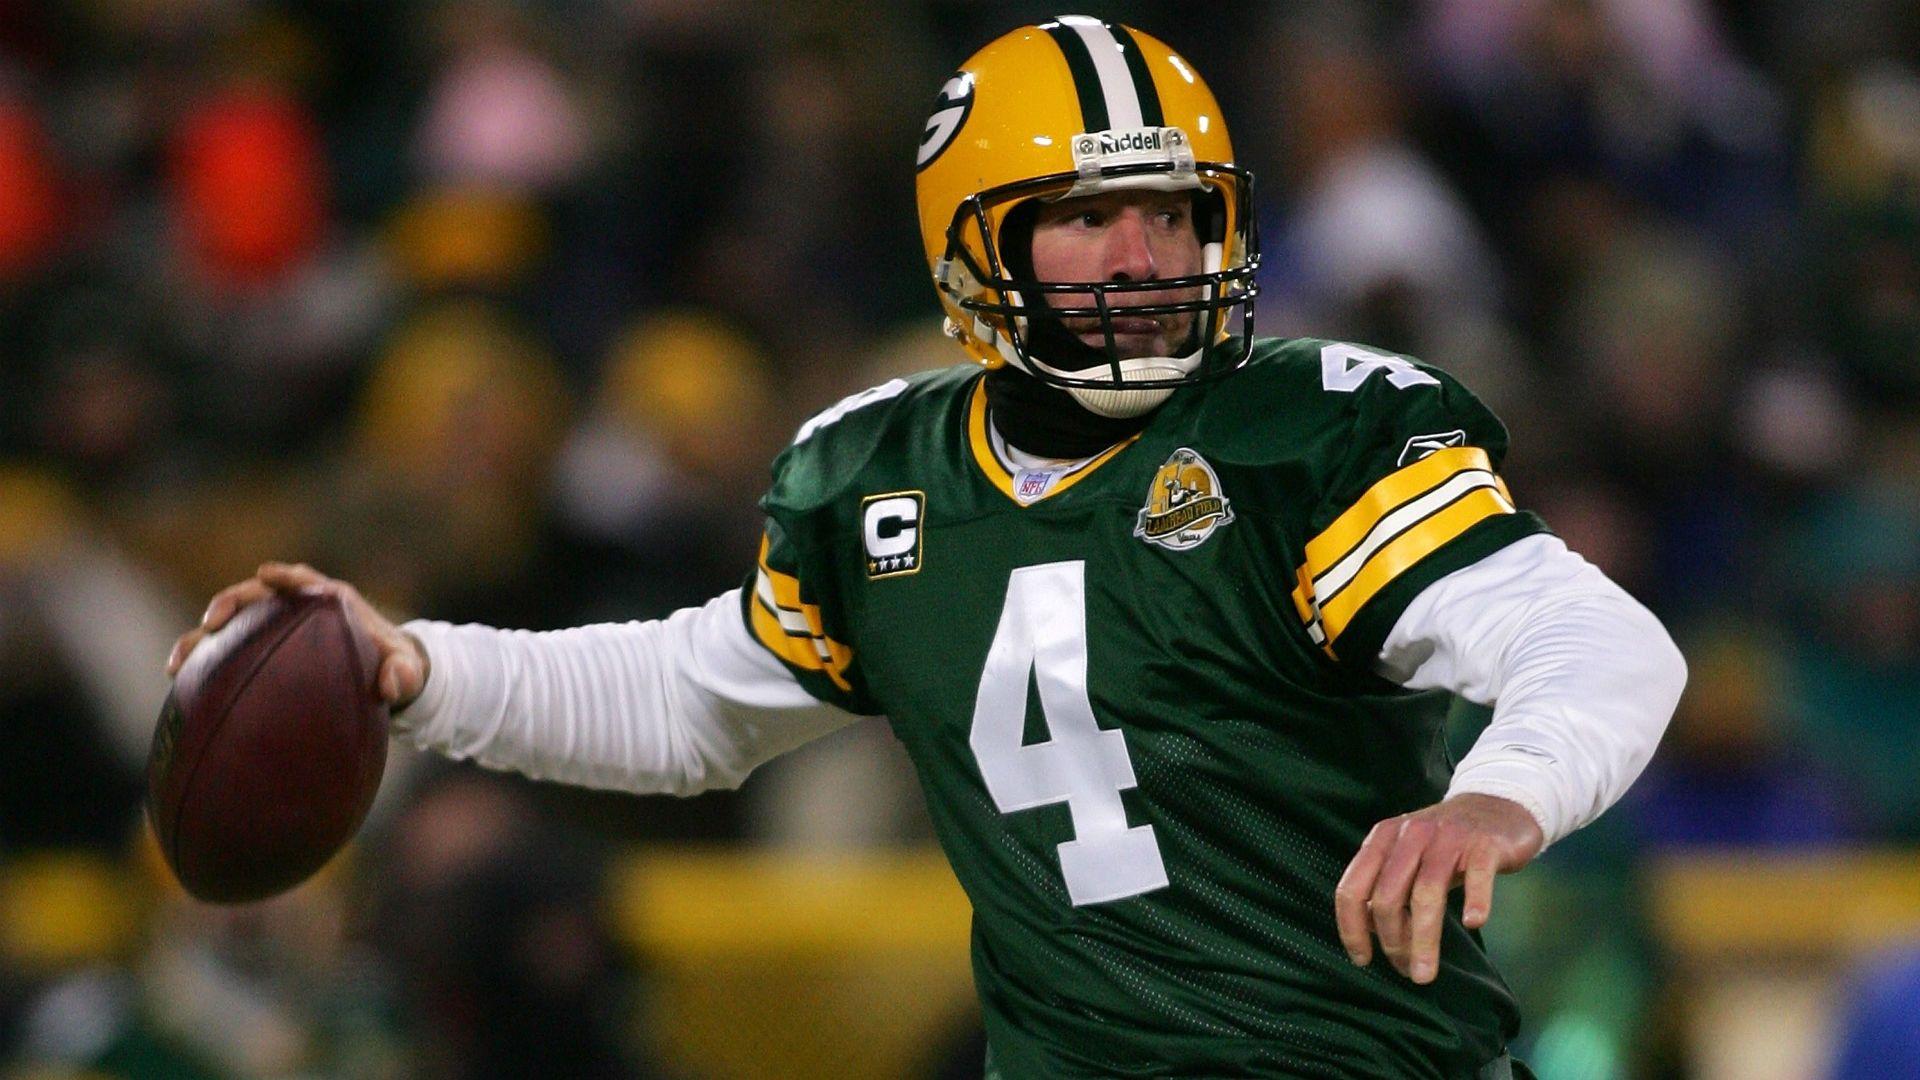 Seven stats that put Brett Favre in a class of his own